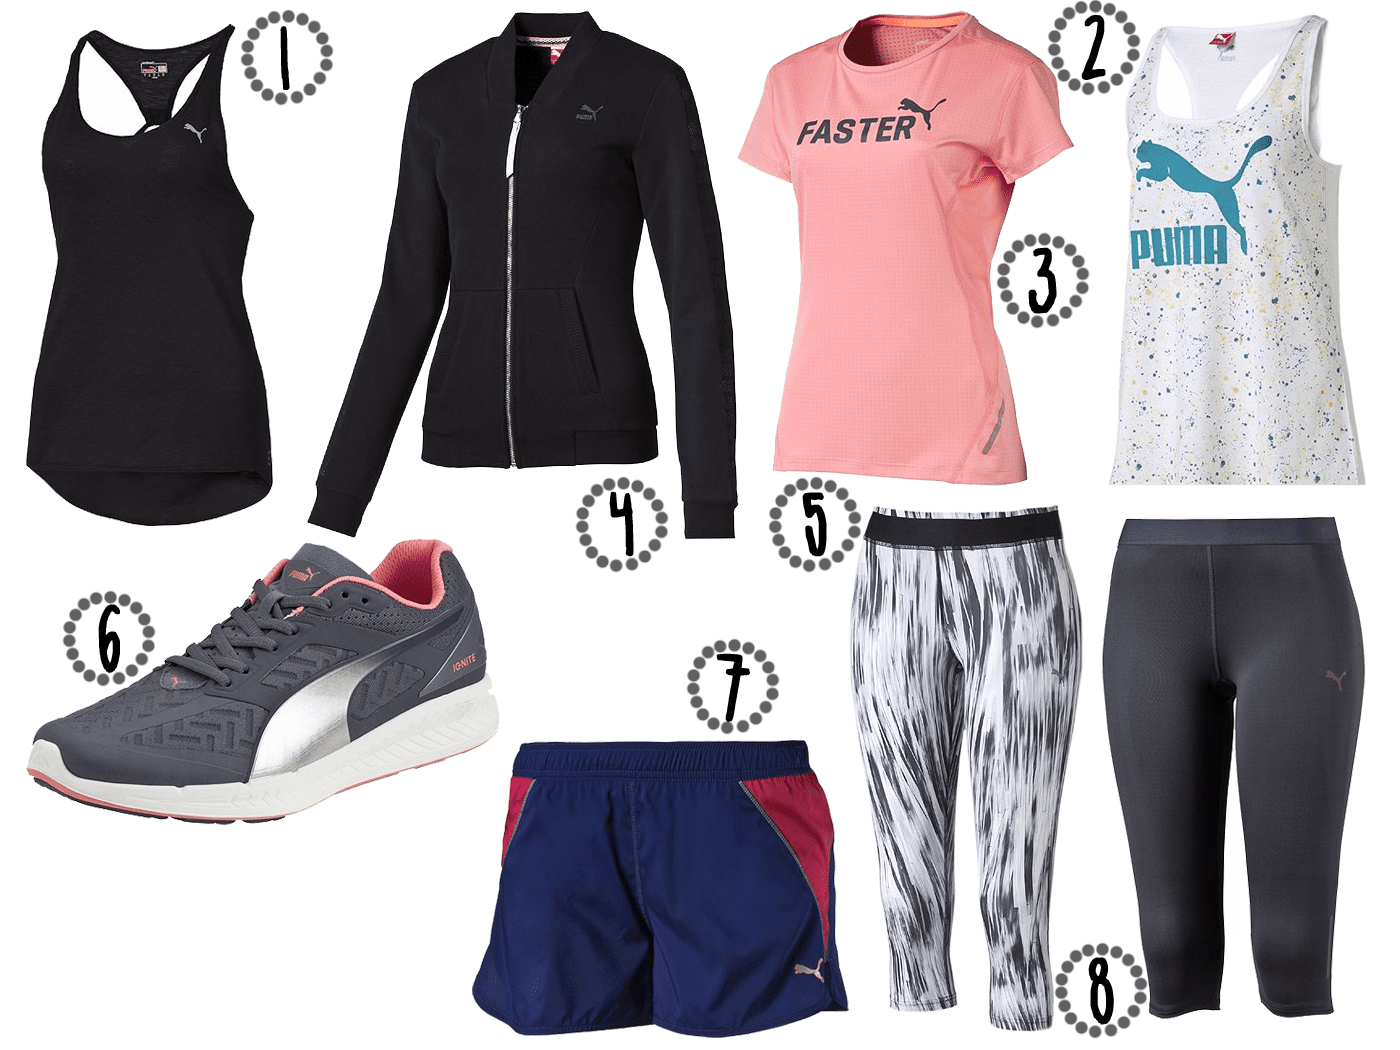 Simple Capsule Workout Wardrobe for Burn Fat fast